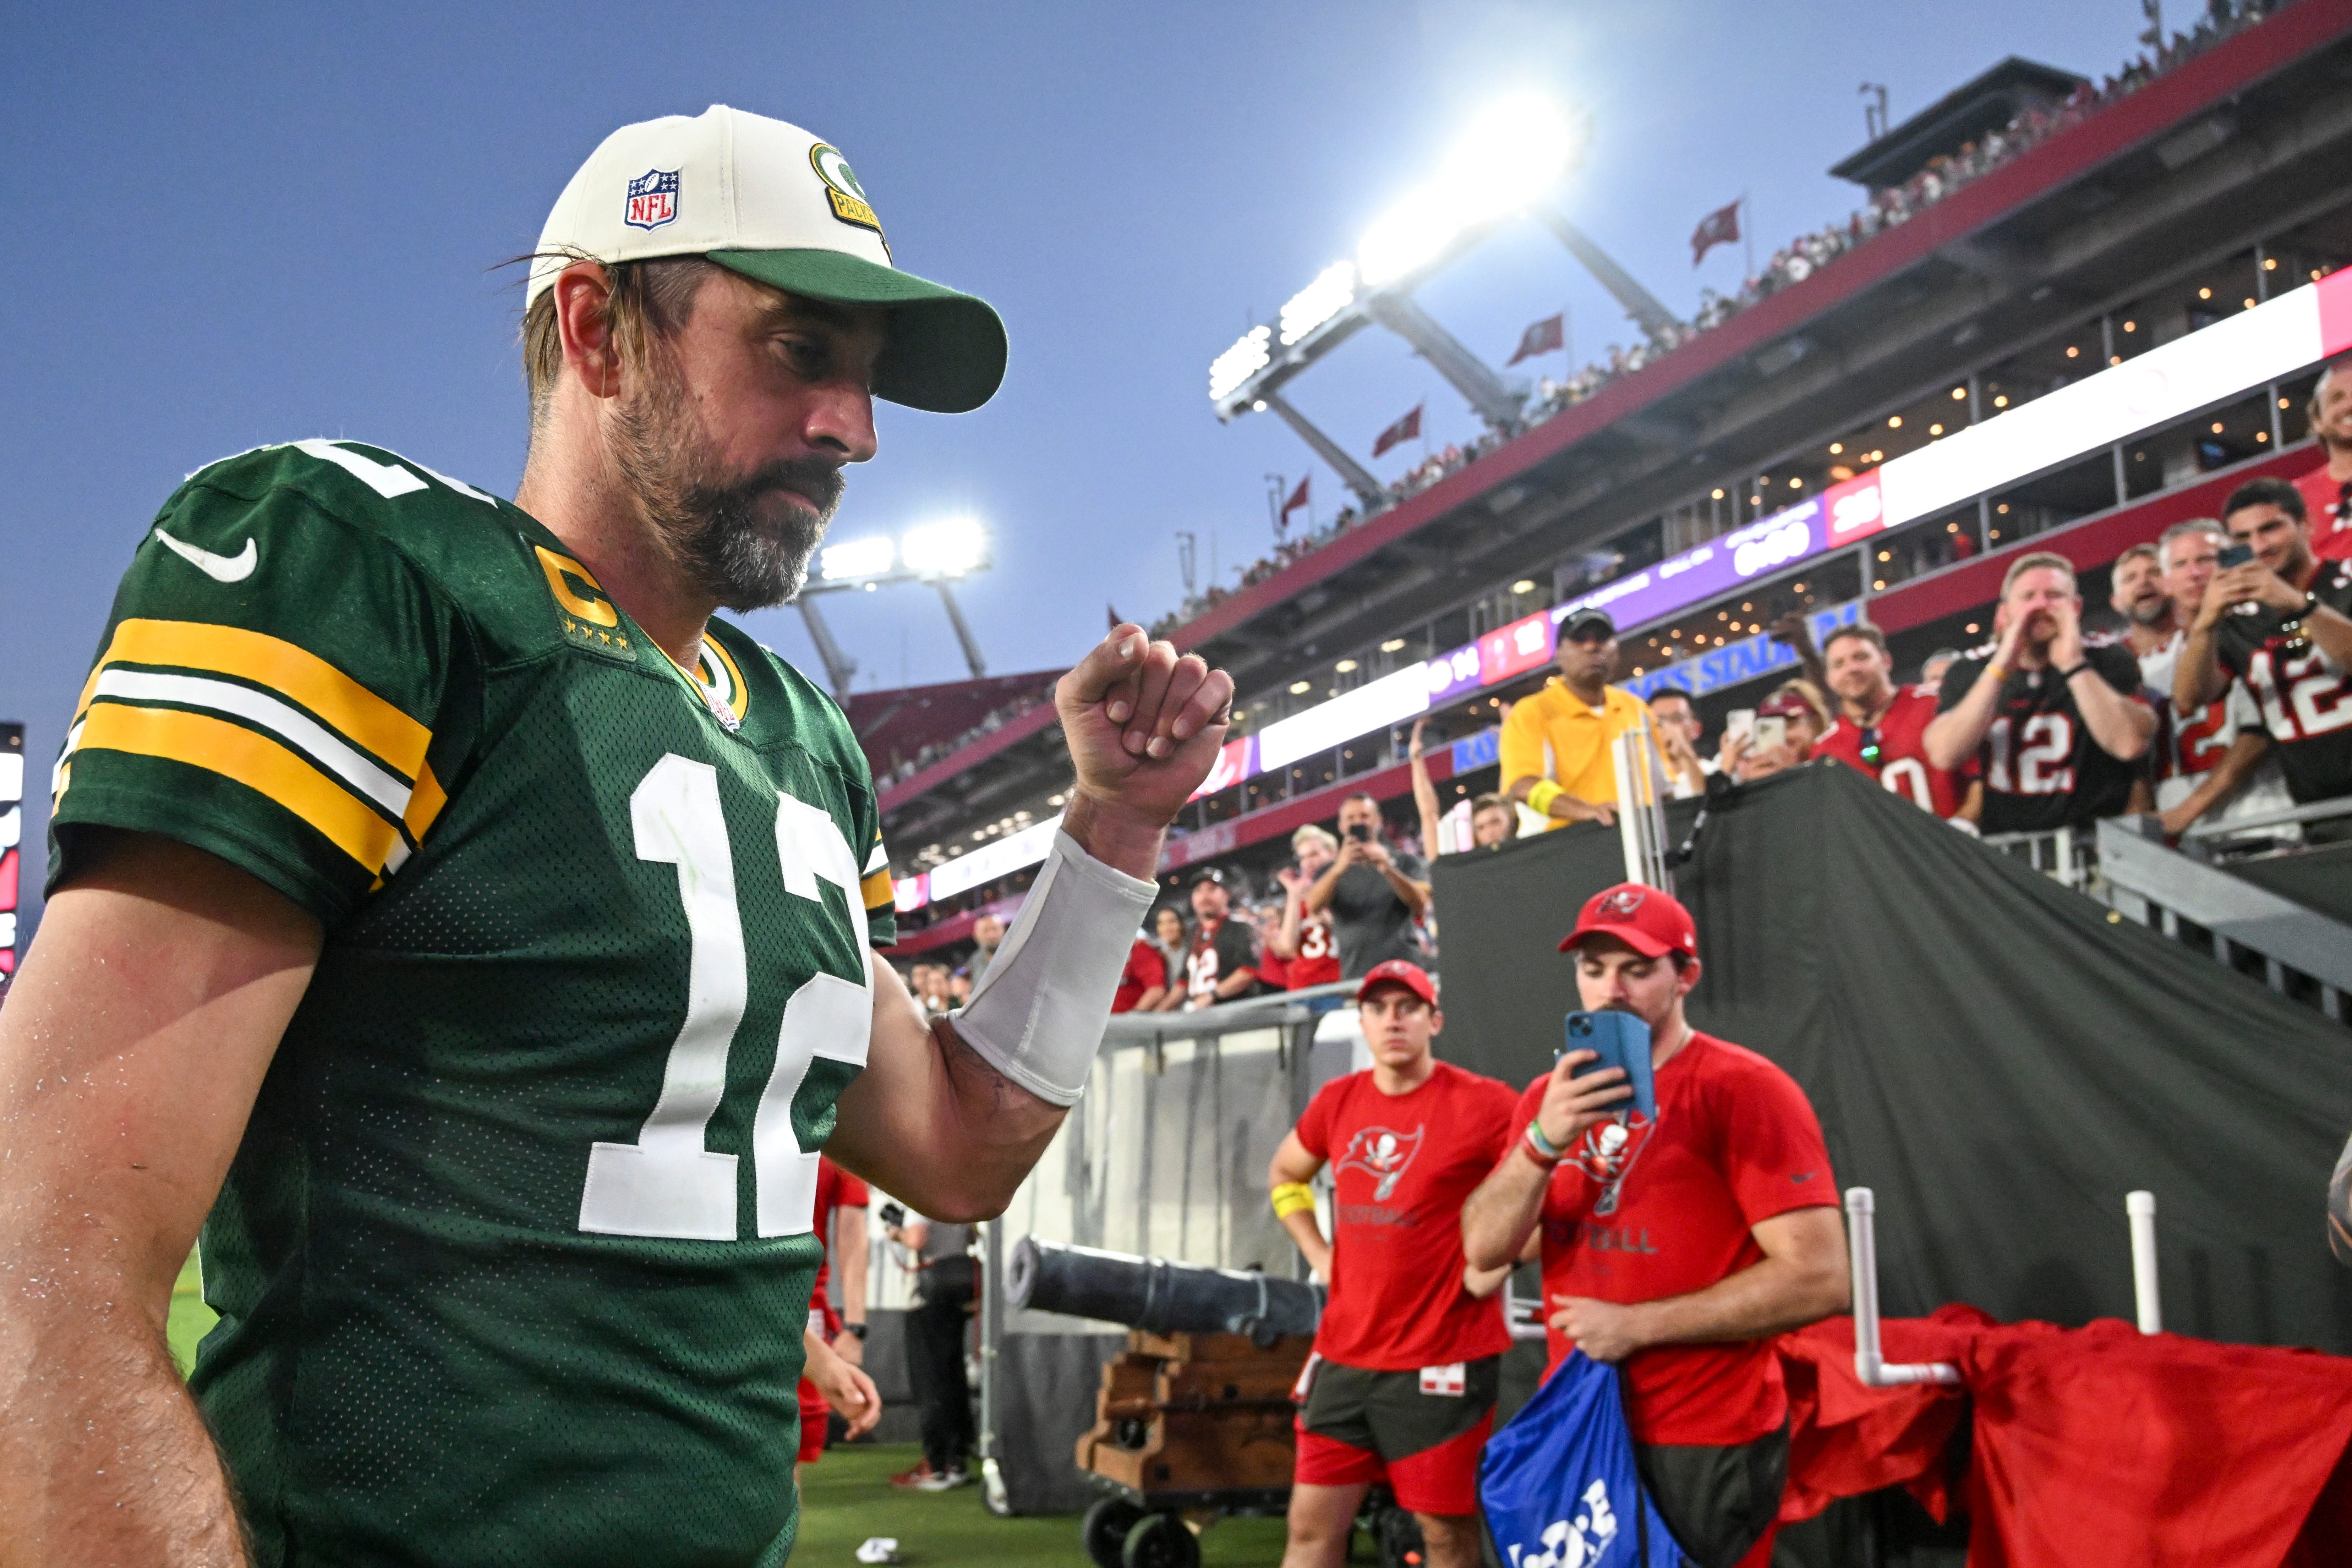 Aaron Rodgers reacts as he walks off the field after the Packers defeated the Buccaneers, 14-12, on Sunday, Sept. 25, 2022, in Tampa, Florida.